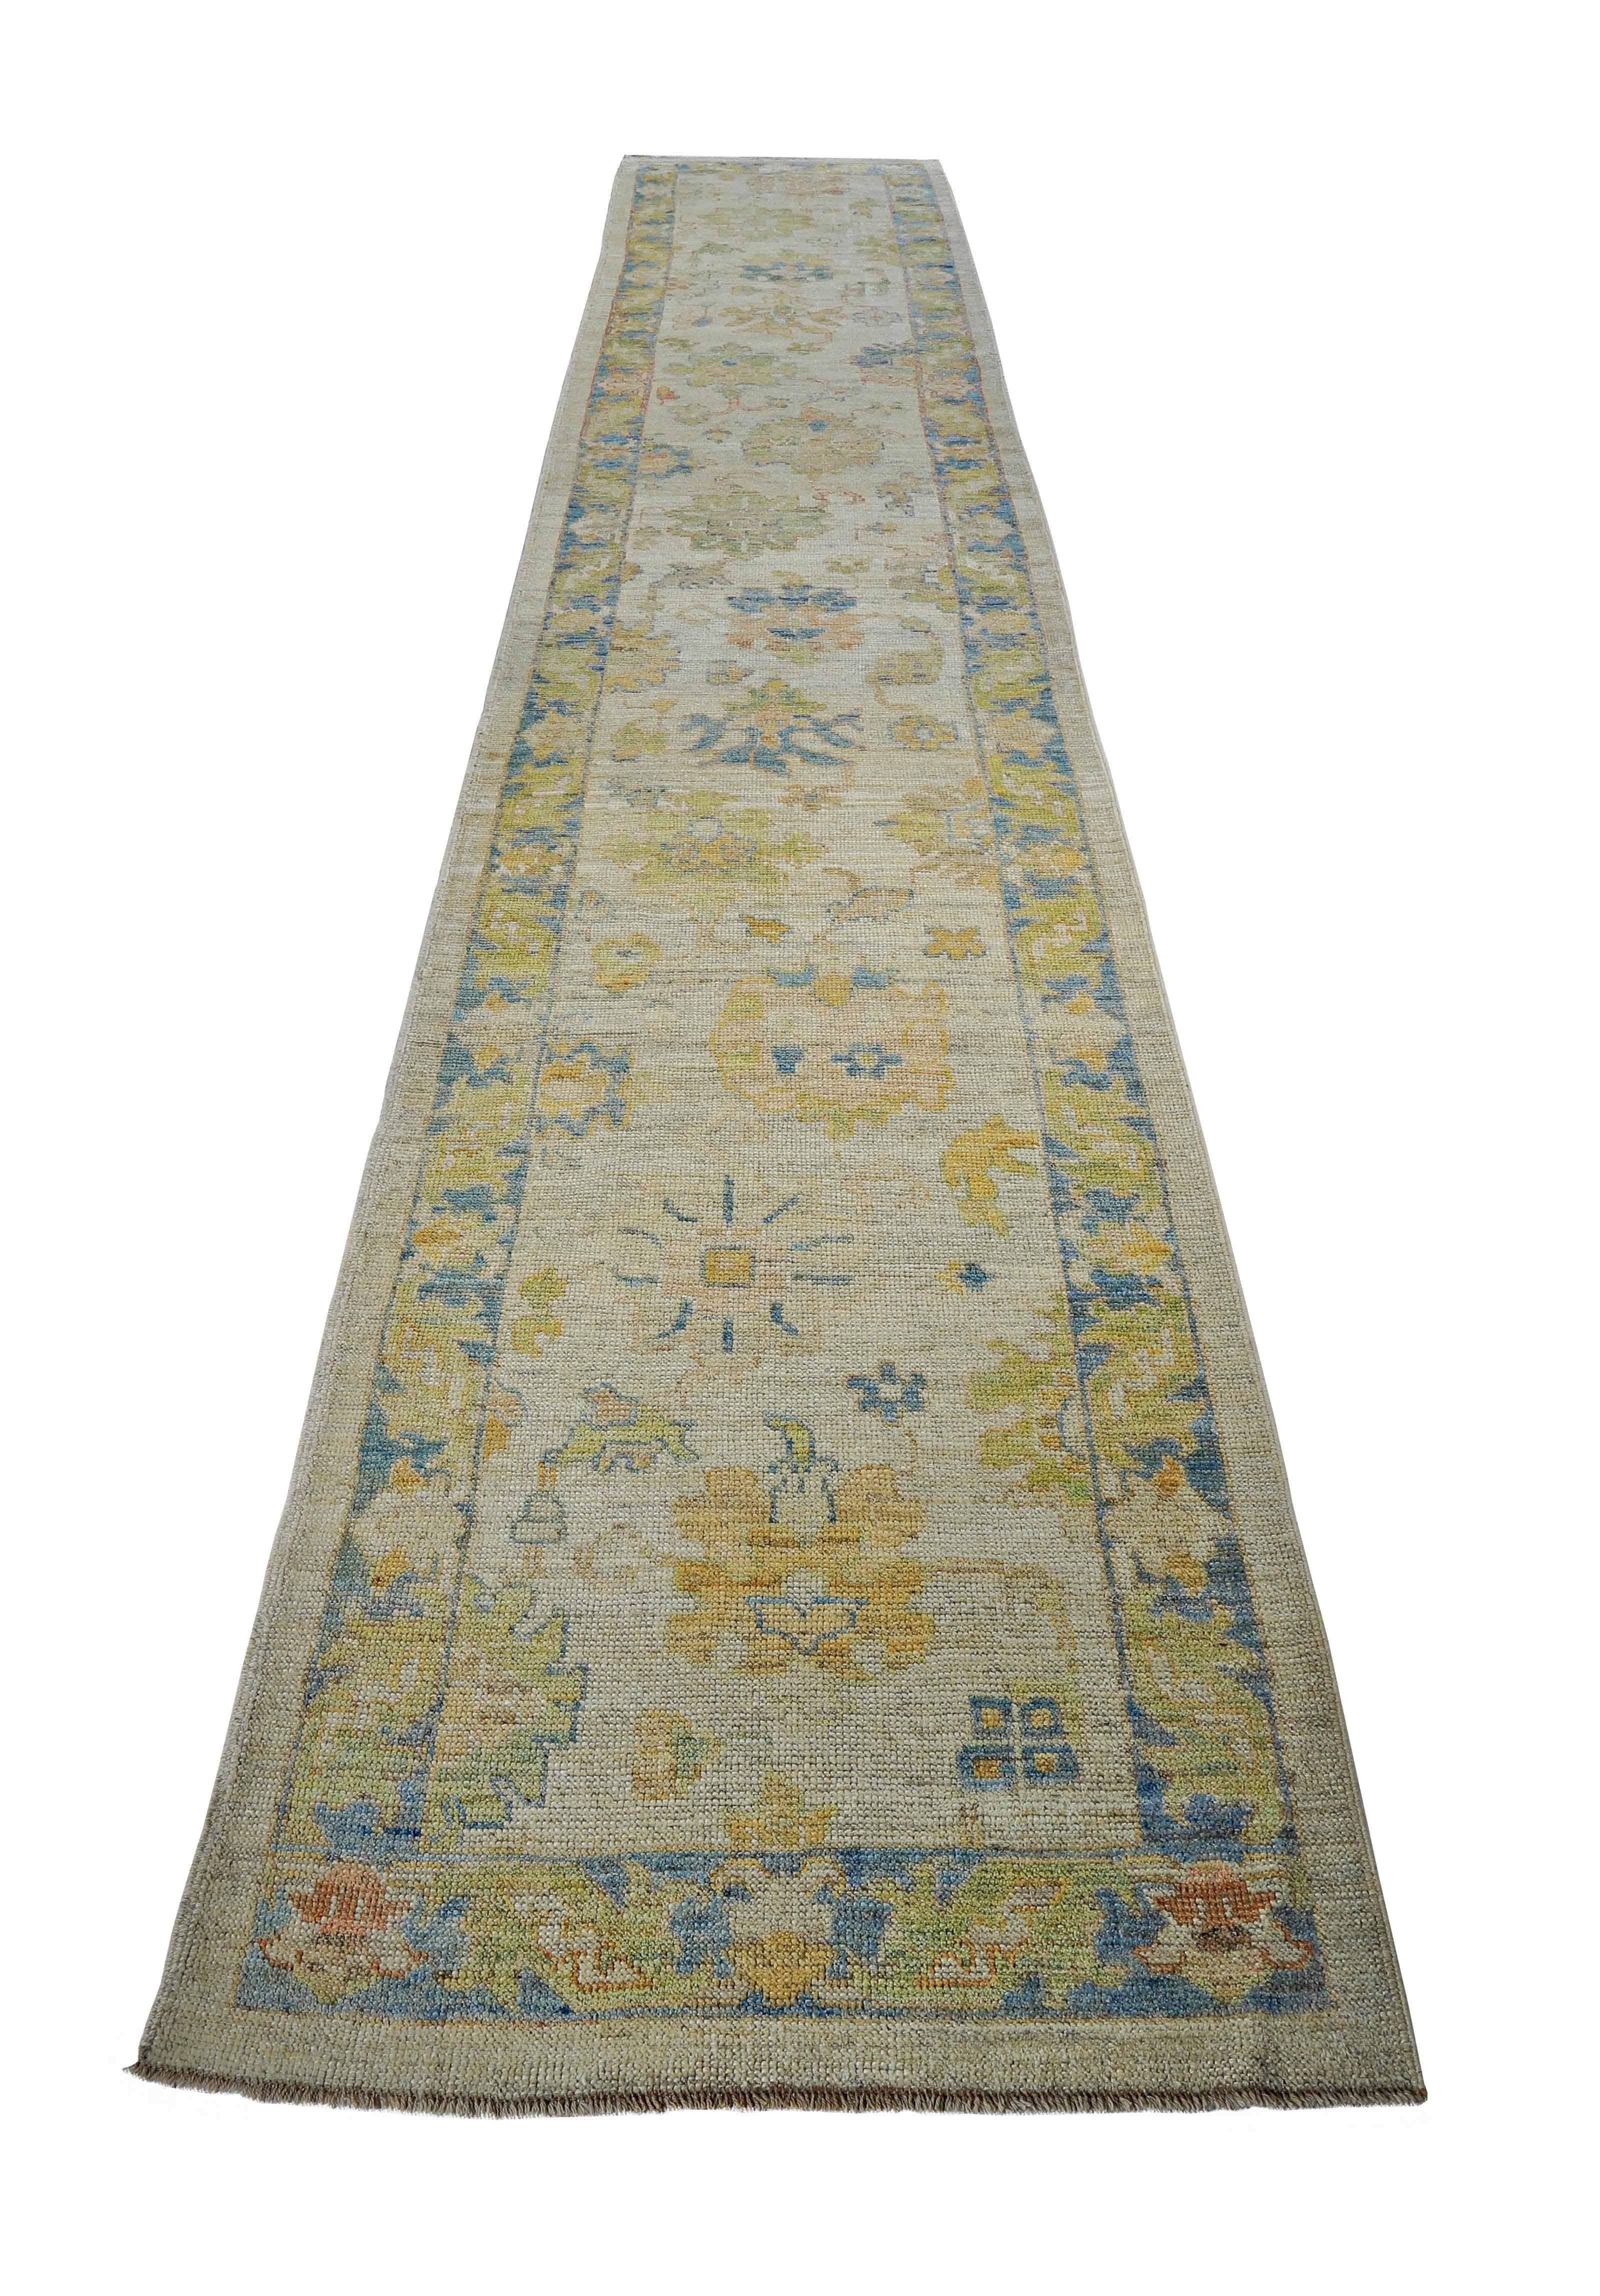 New Turkish runner rug made of handwoven sheep’s wool of the finest quality. It’s colored with organic vegetable dyes that are certified safe for humans and pets alike. It features blue and green floral details on an ivory field. Flower patterns are